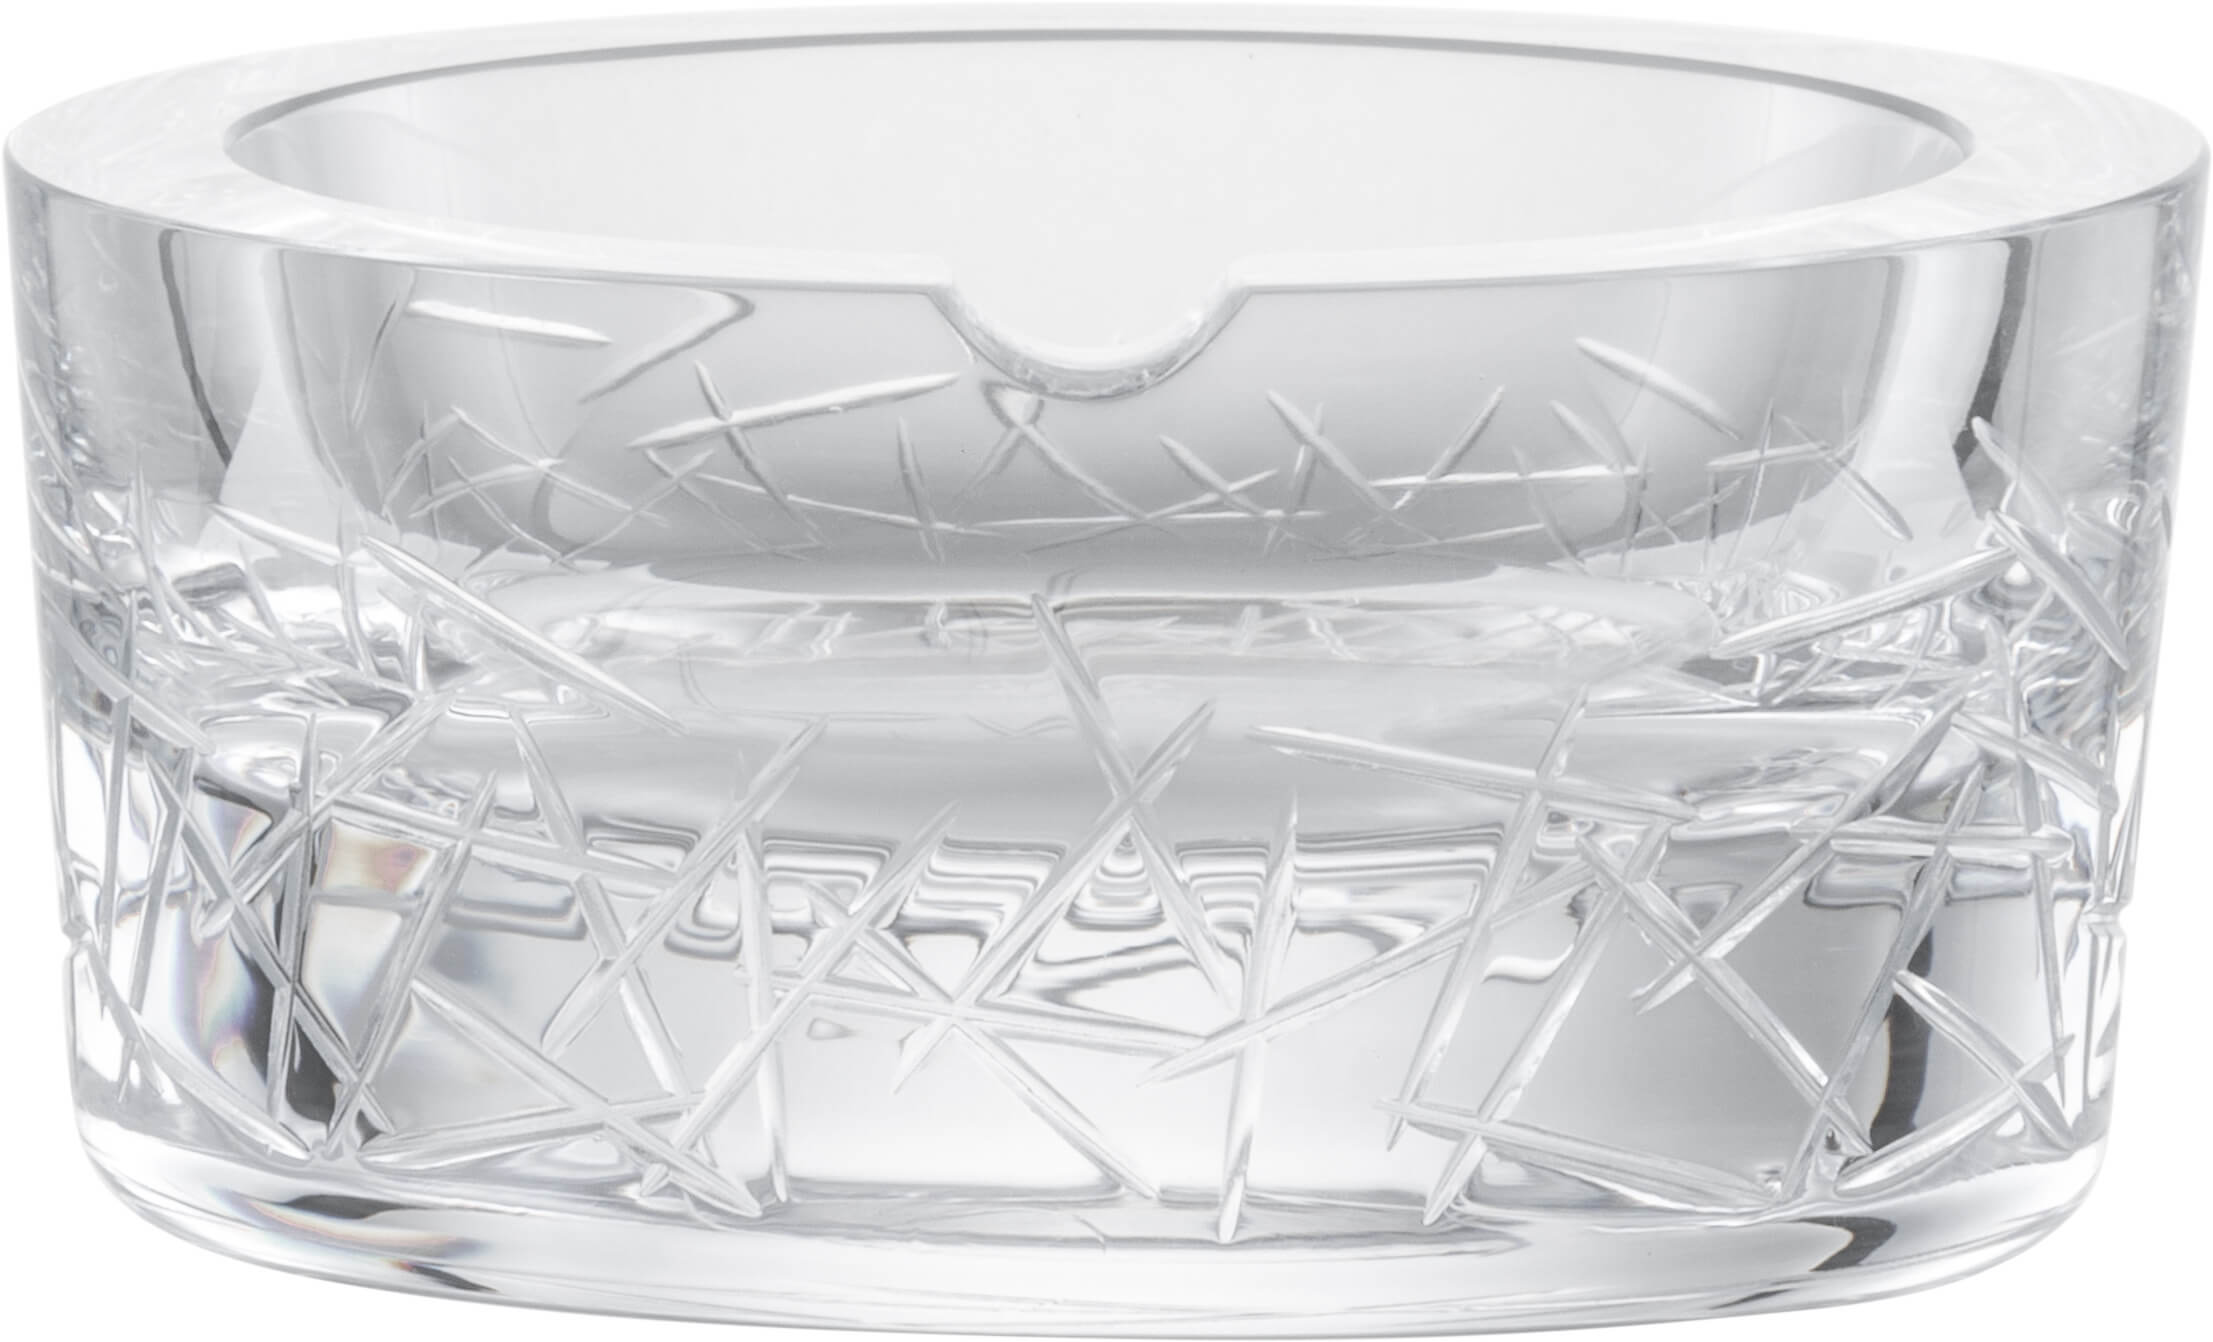 Ashtray Hommage Glace, Zwiesel Glas - 92mm (1 pc.)